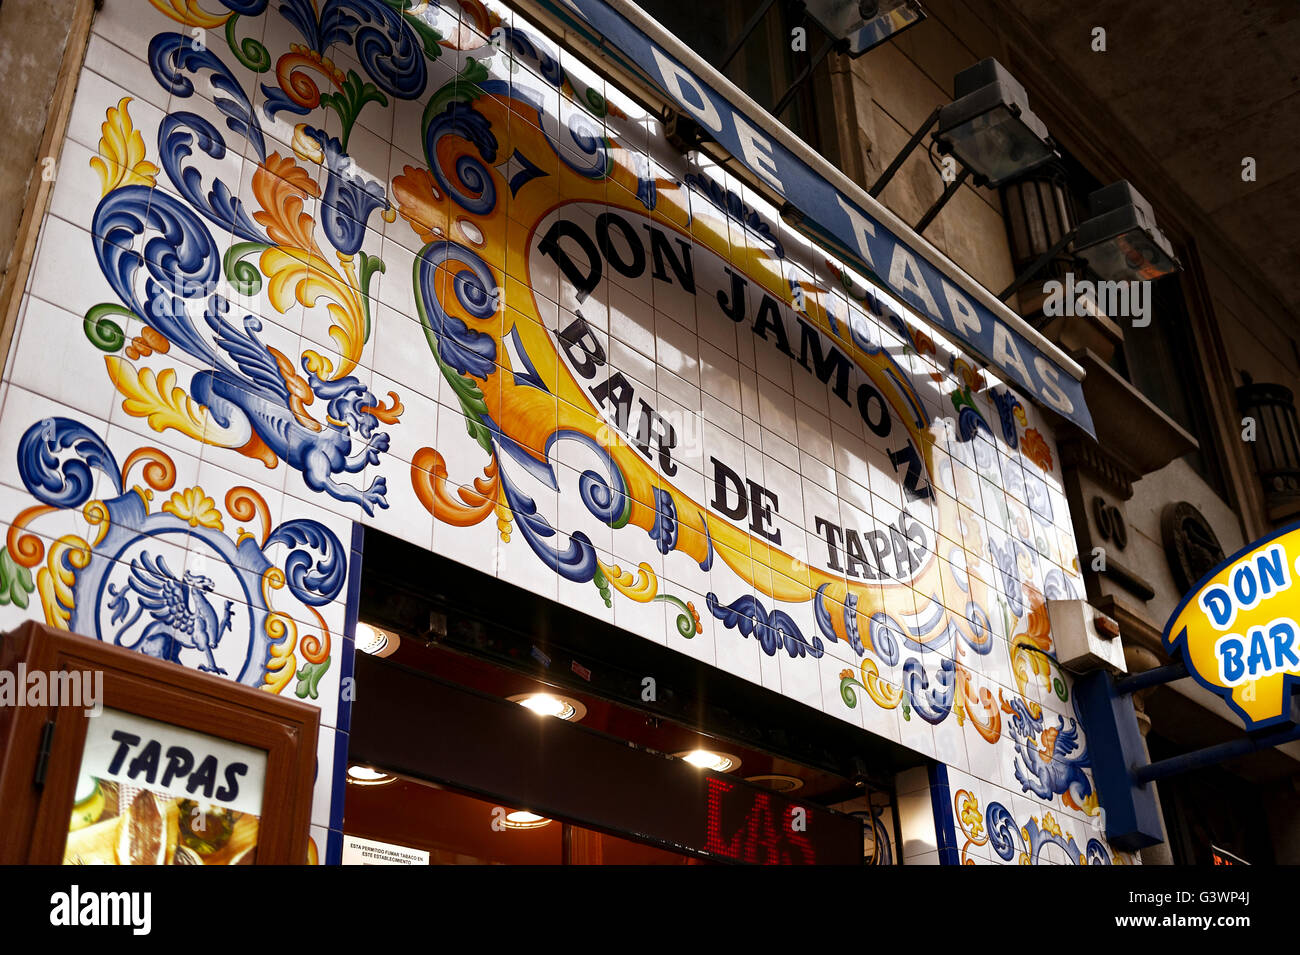 Don Jamon restaurant with ornate tiling facade and menu, Madrid, Spain Stock Photo